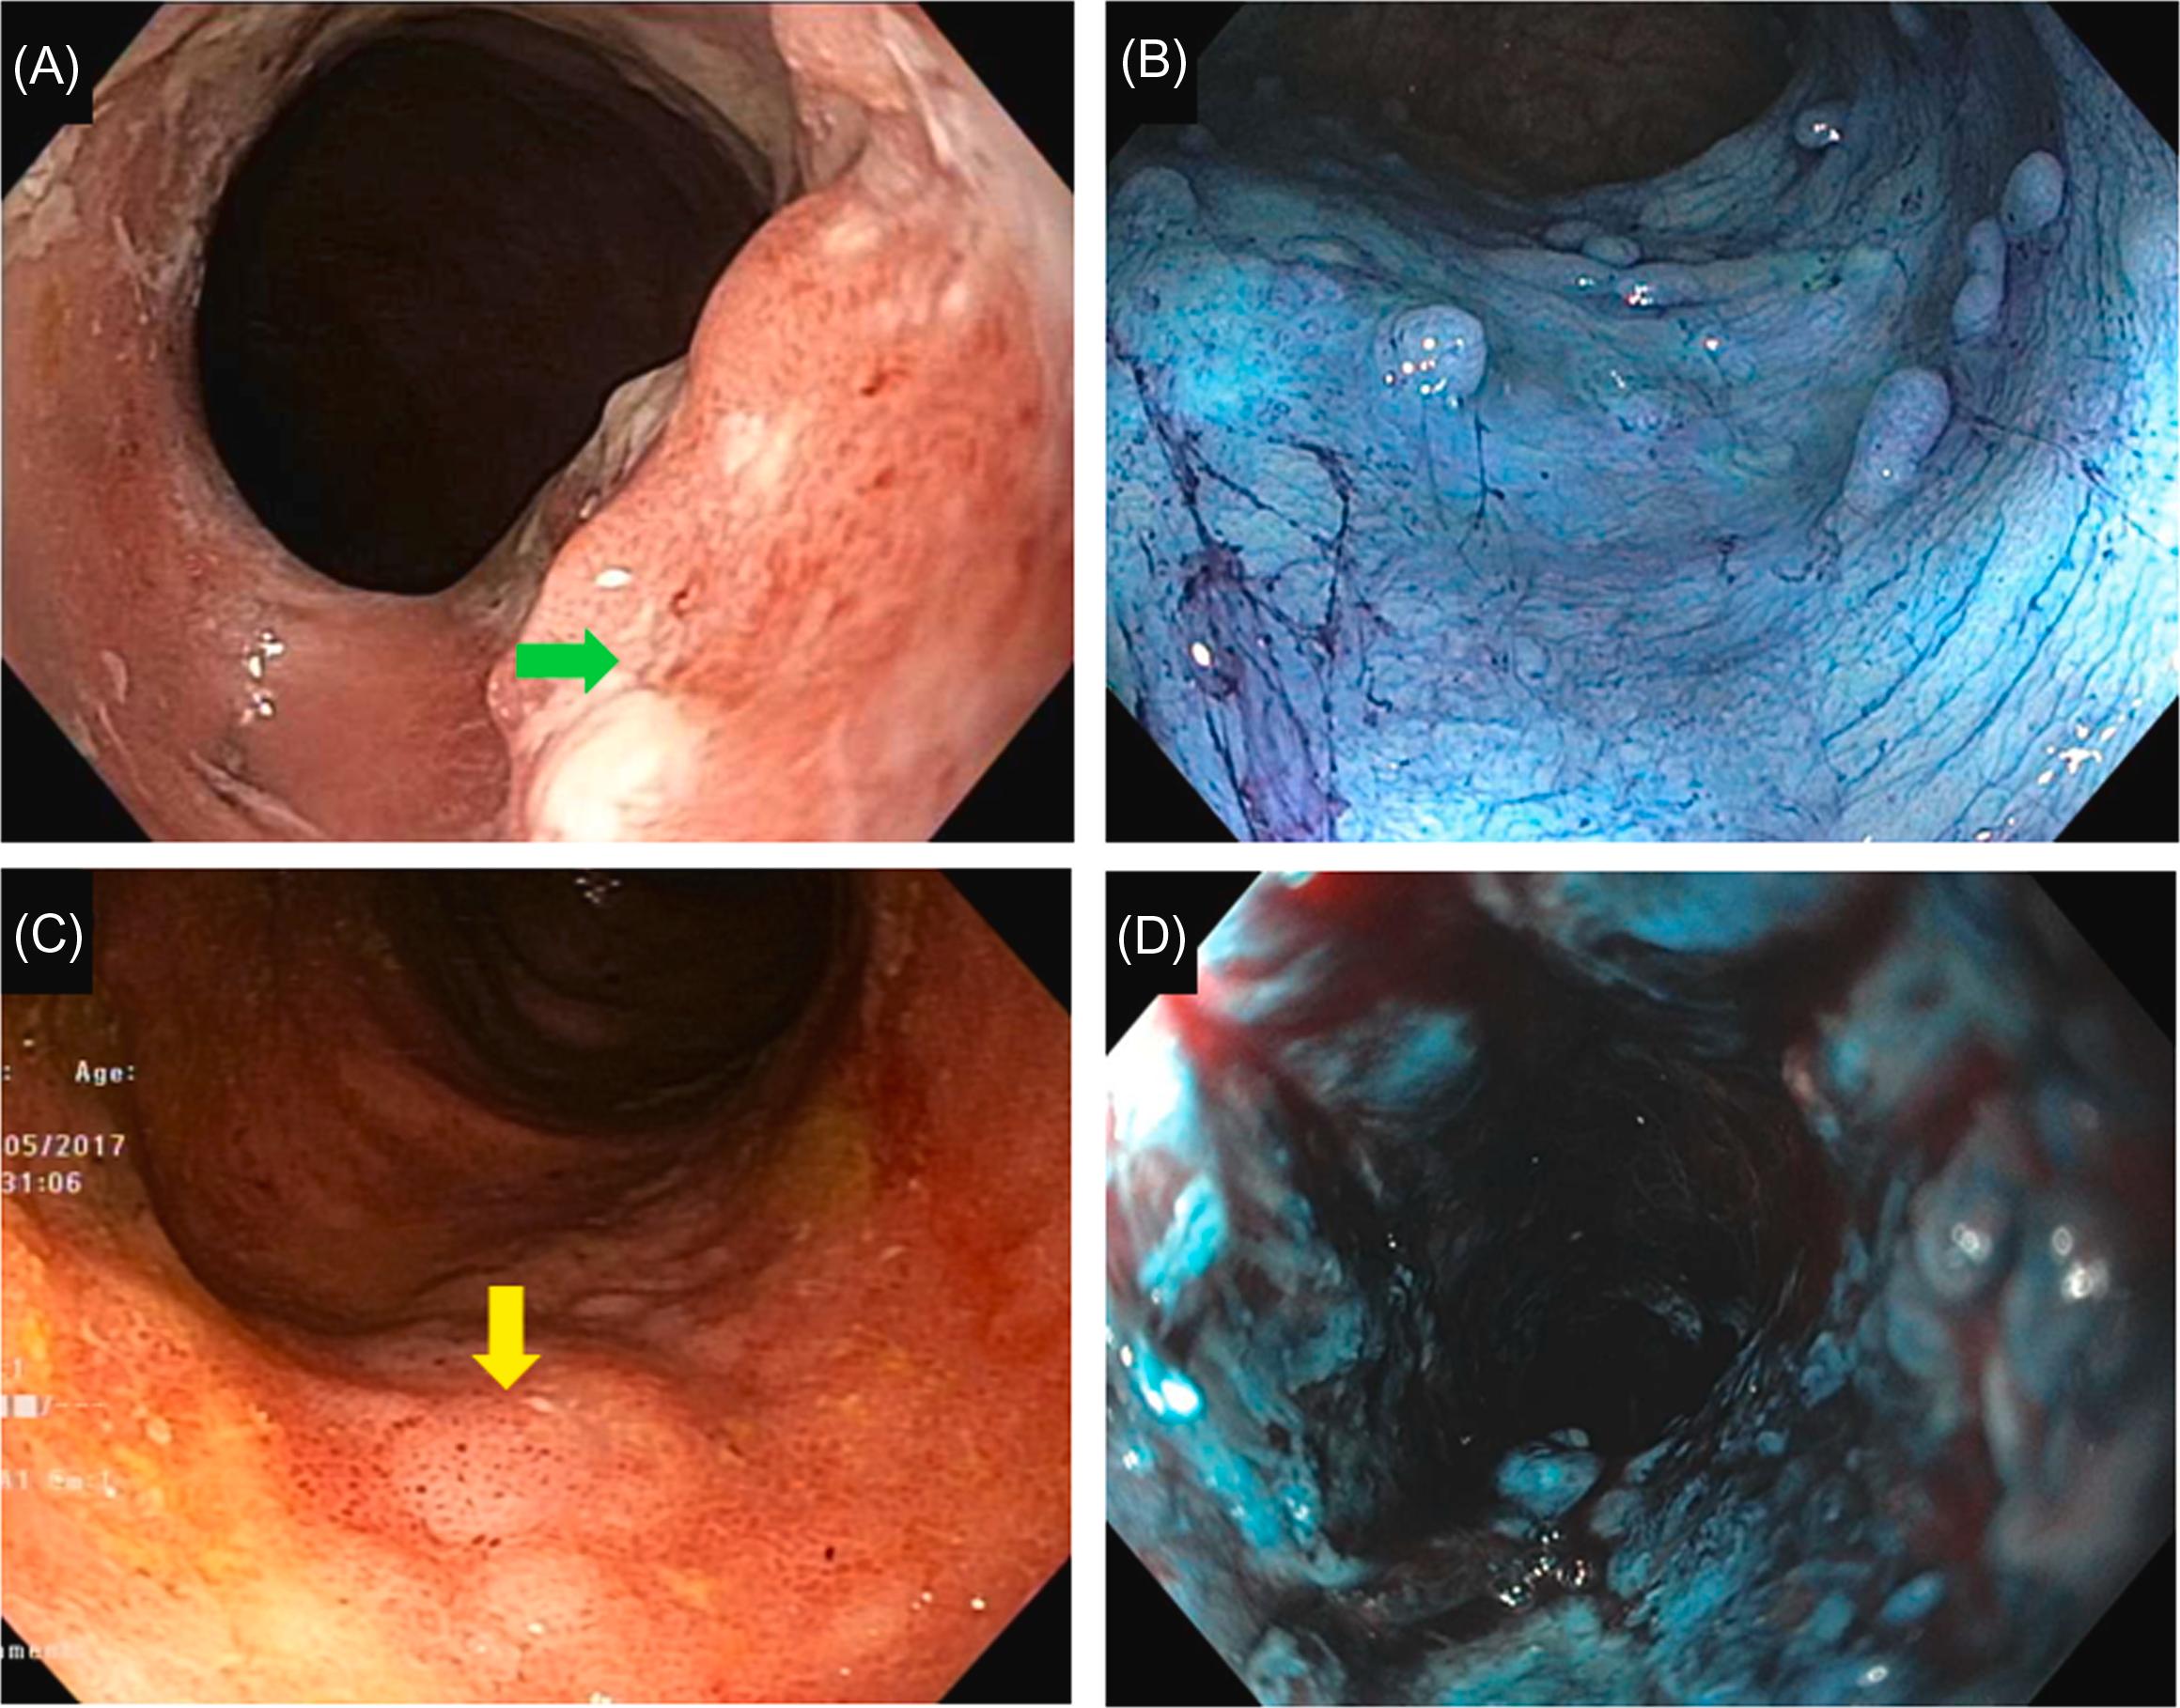 Figure 19.6, Components of the SCENIC Classification: (A) Descriptor- ulceration ( green arrow ), (B) distinct border, (C) indistinct border ( yellow arrow ), and (D) strictured ileal pouch-anal anastomosis with poorly defined surface structure. Histology showed adenocarcinoma (D). SCENIC , the Surveillance for Colorectal Endoscopic Neoplasia Detection and Management in Inflammatory Bowel Disease Patients.